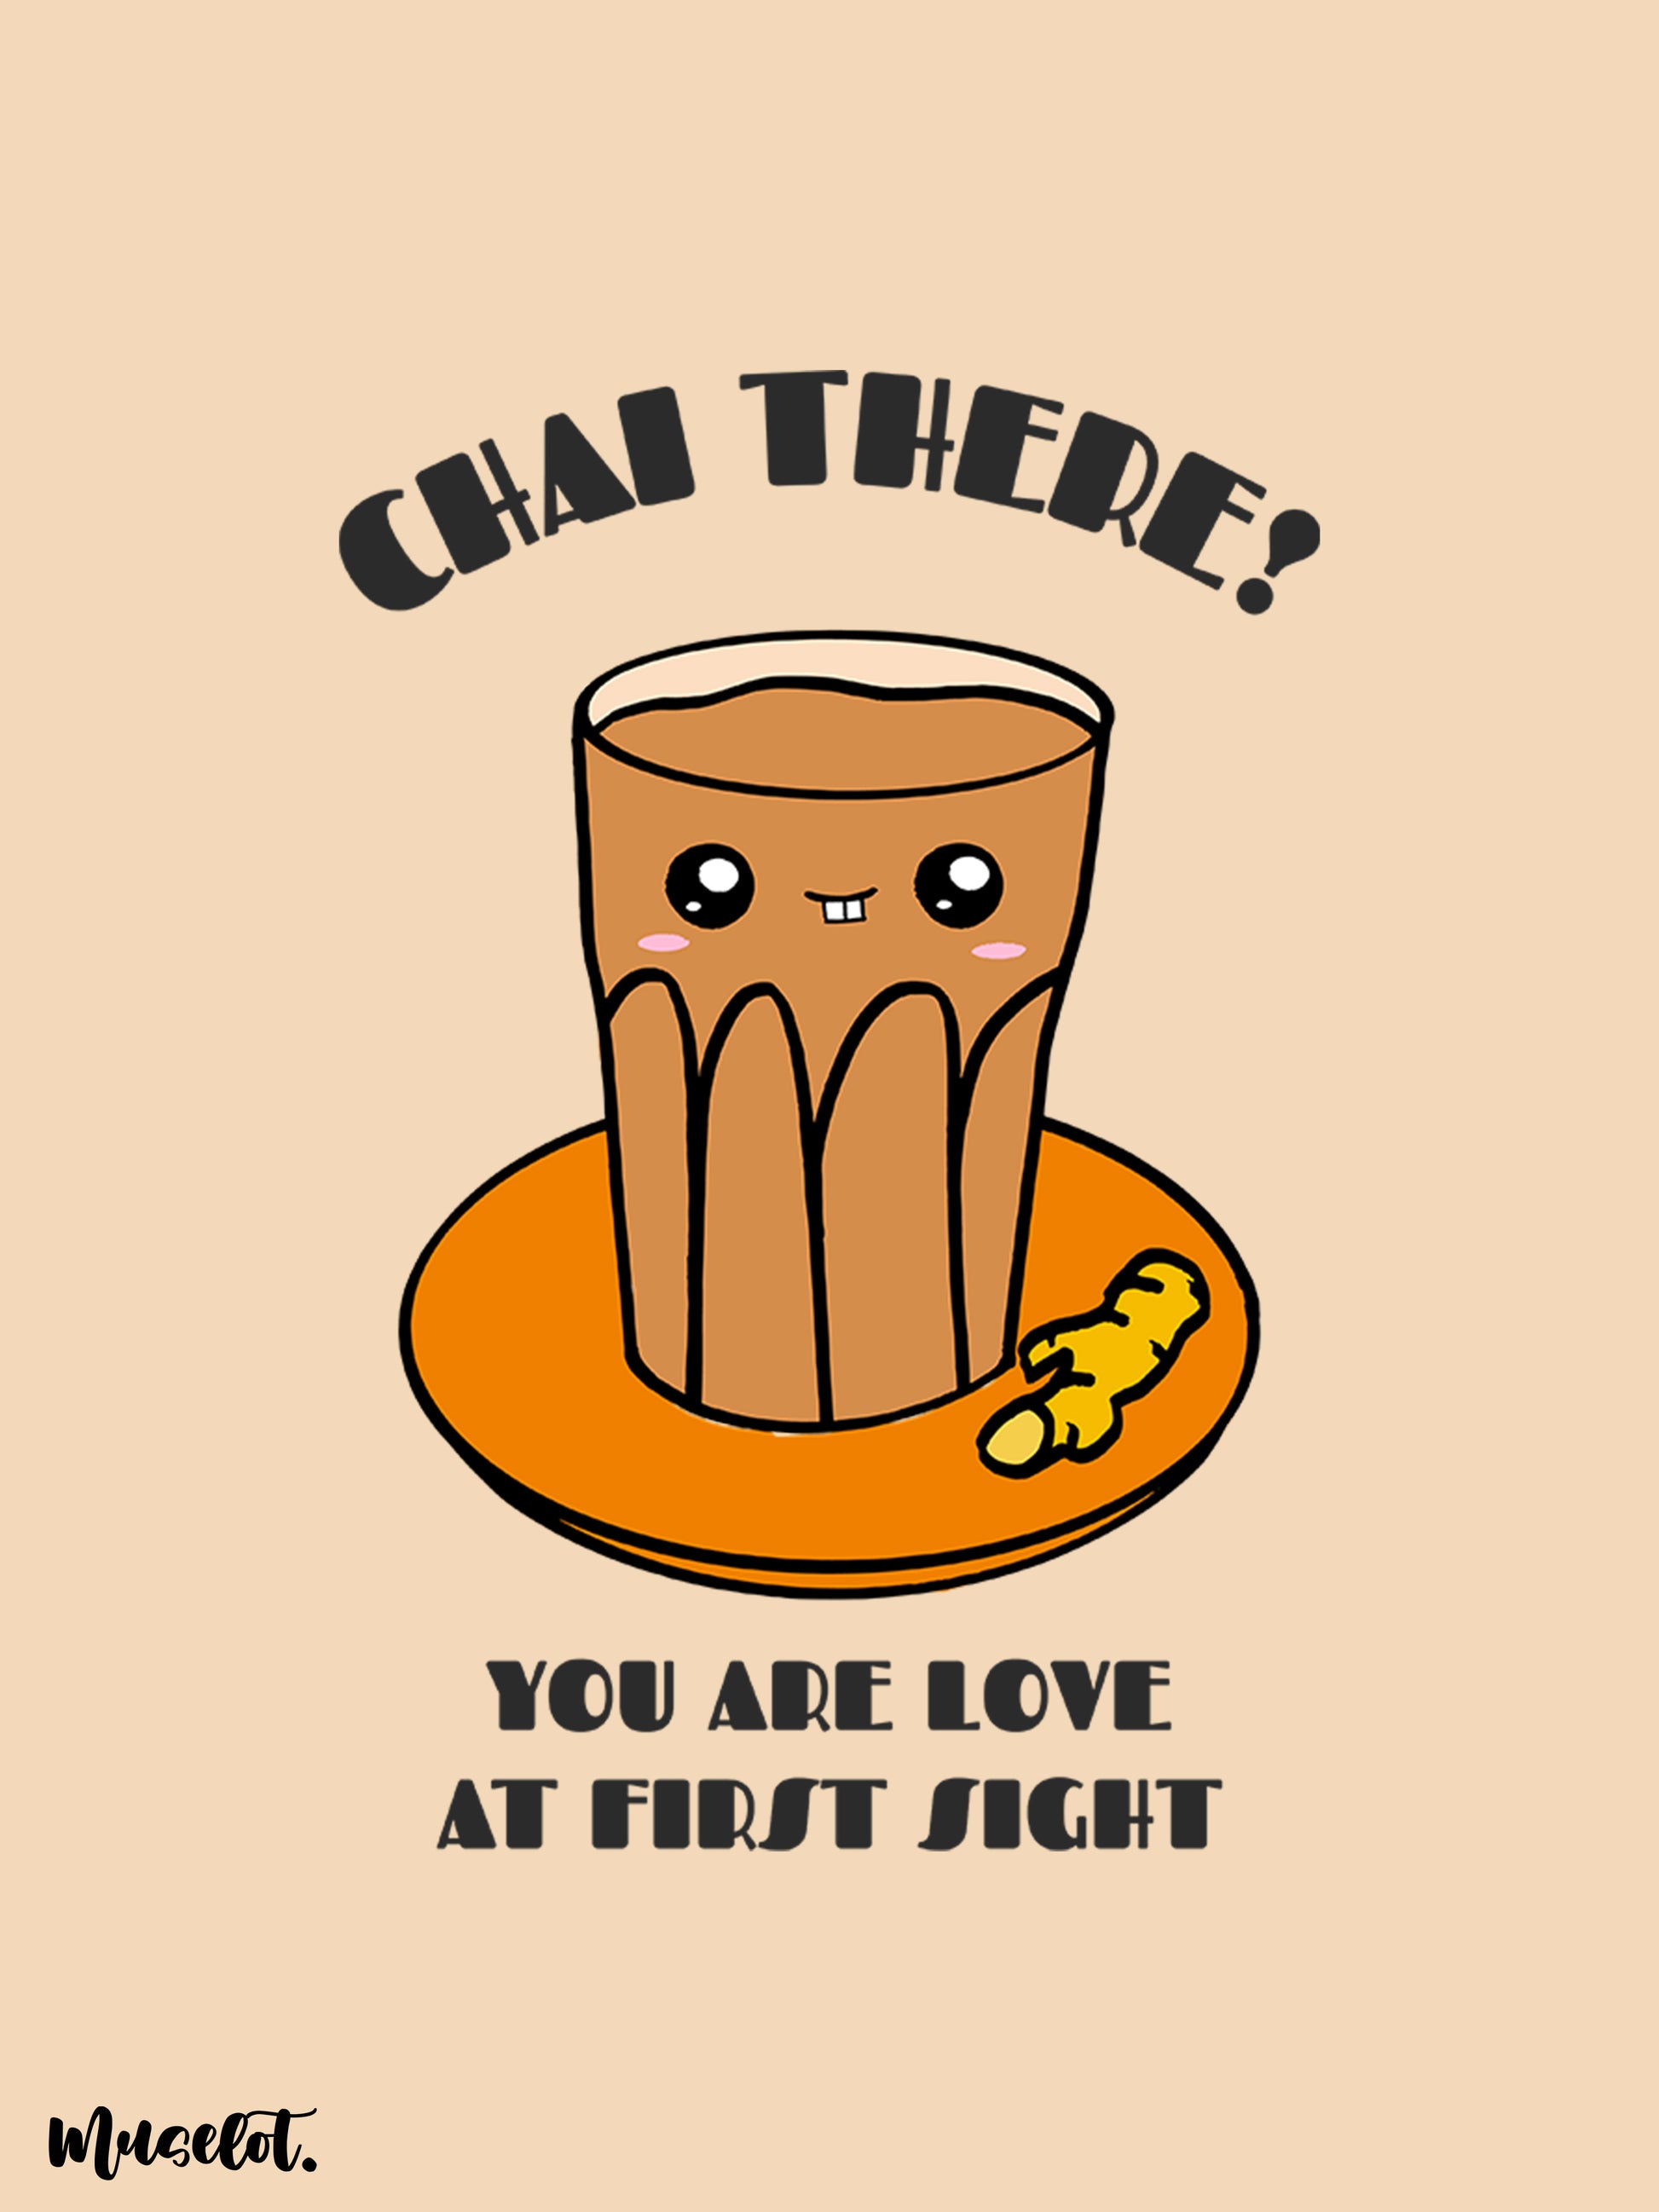 Chai there - you are love at first sight illustrated phone case available for all models of phone brands like apple, samsung, vivo, oppo, realme, google pixel, lenovo, moto, nokia and oneplus.